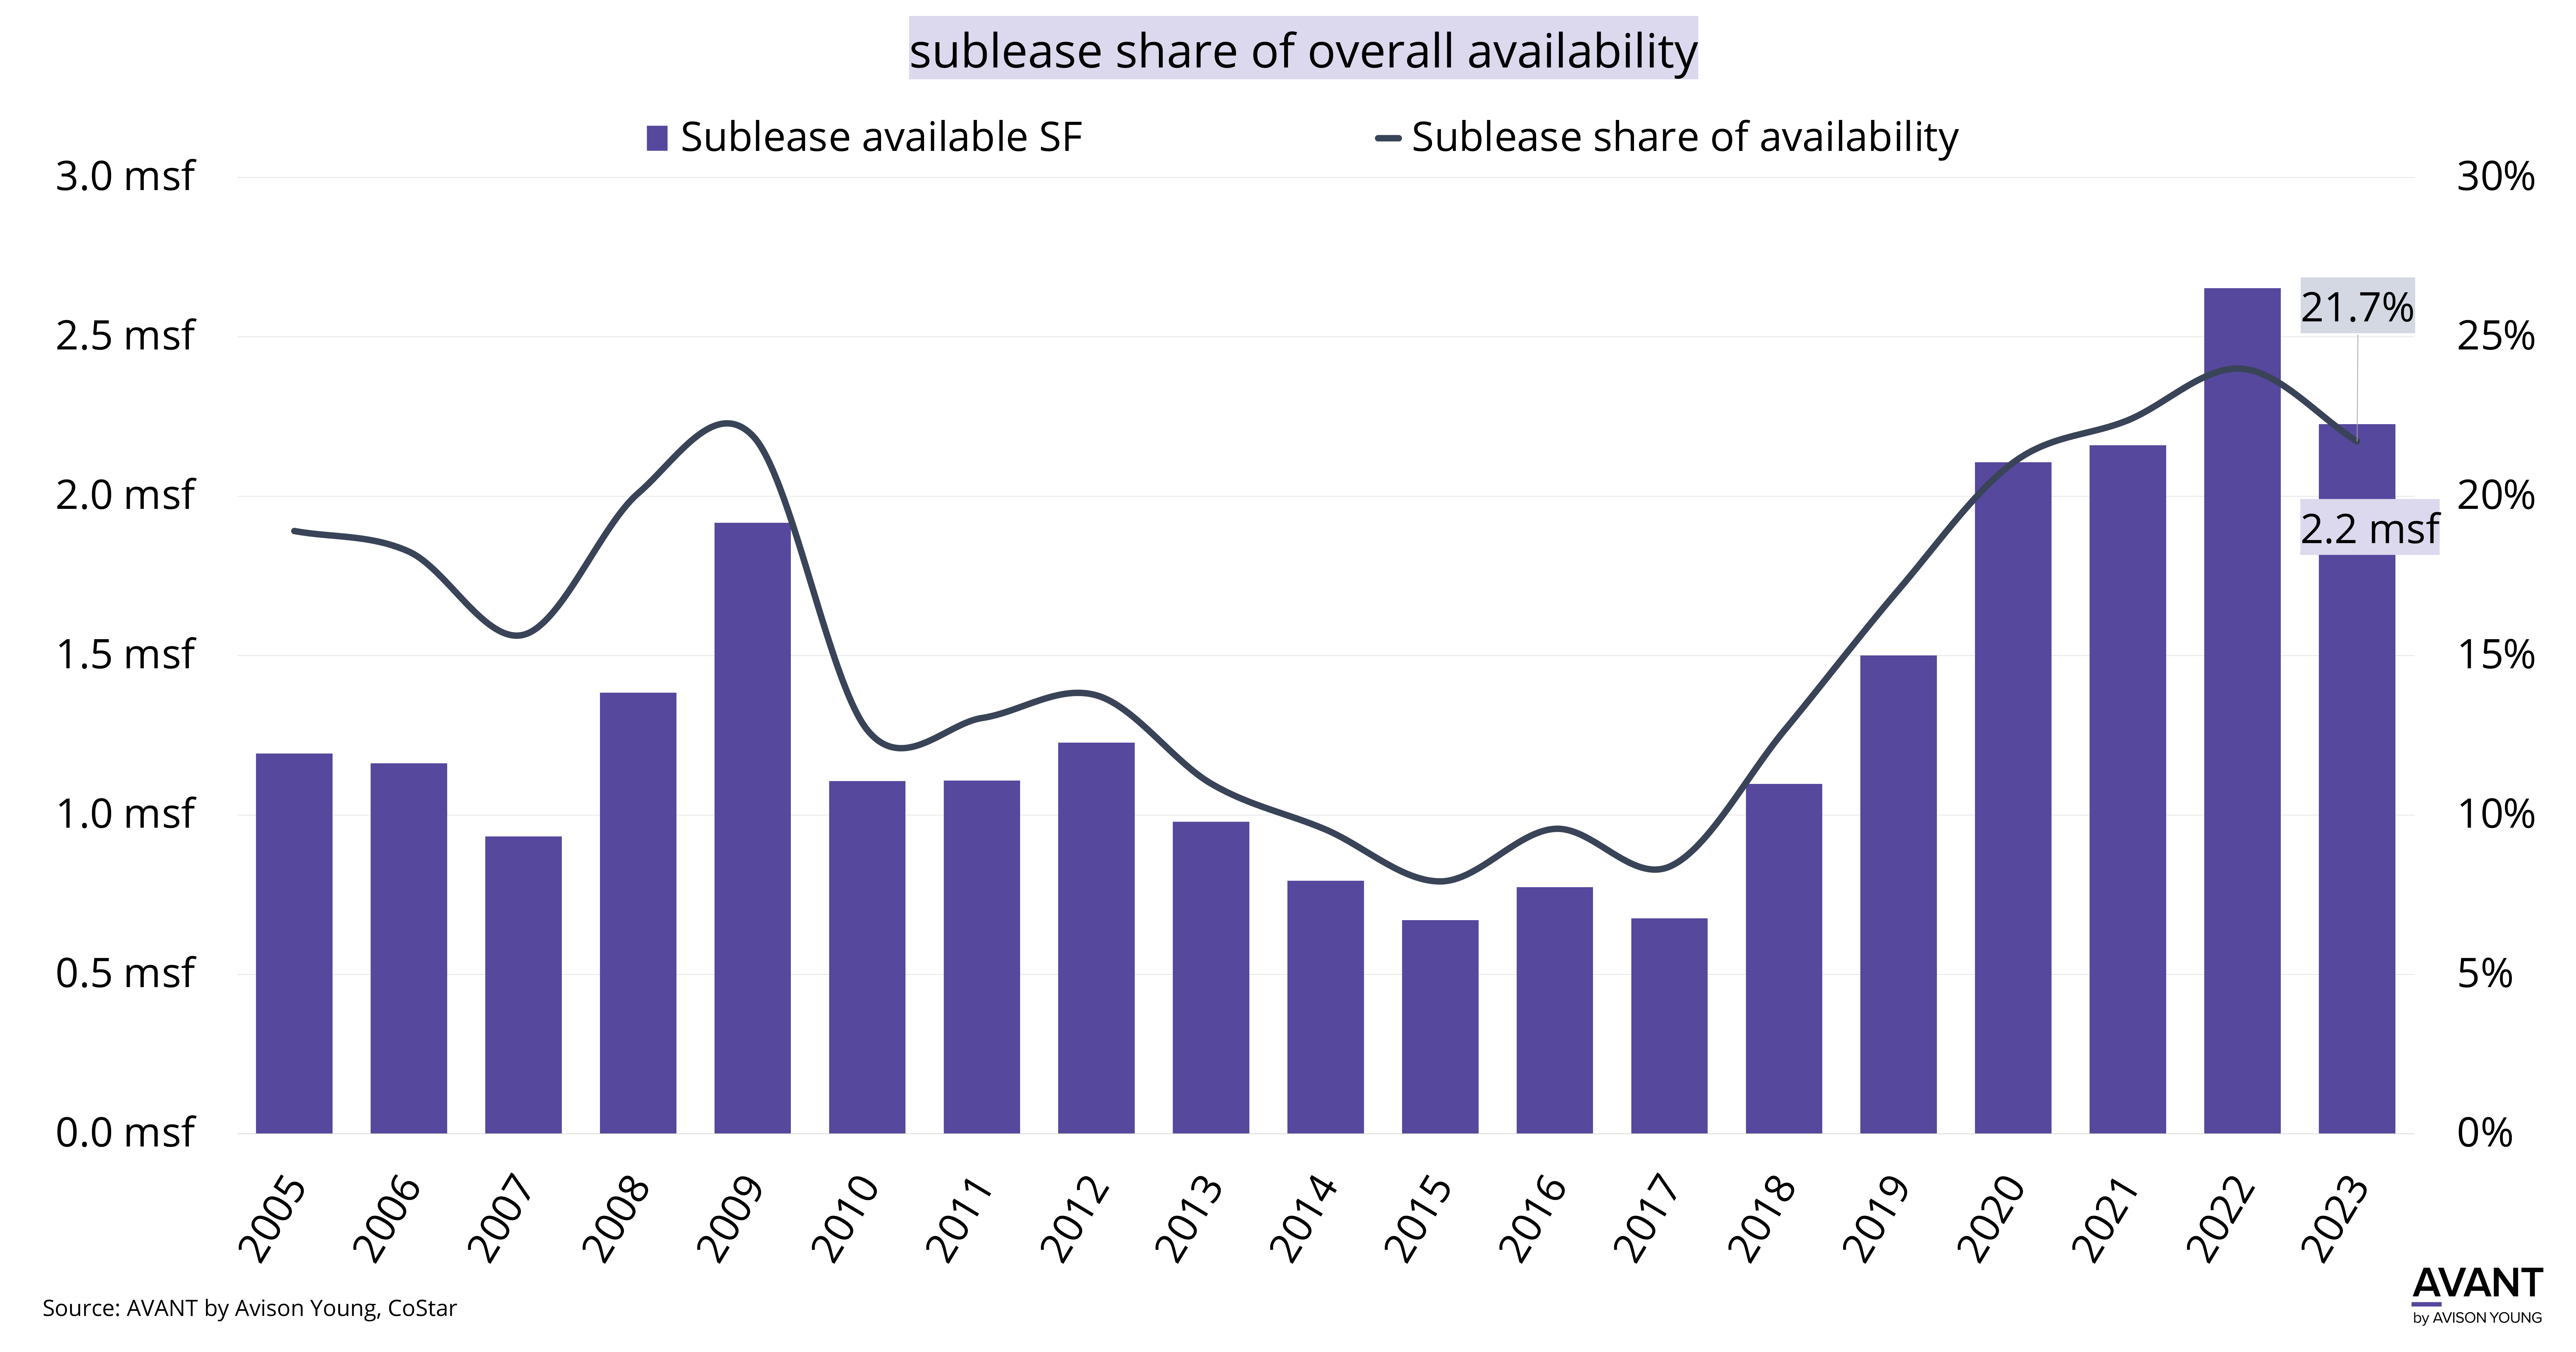 Will the availability of sublease space in Fairfield County continue to decrease?